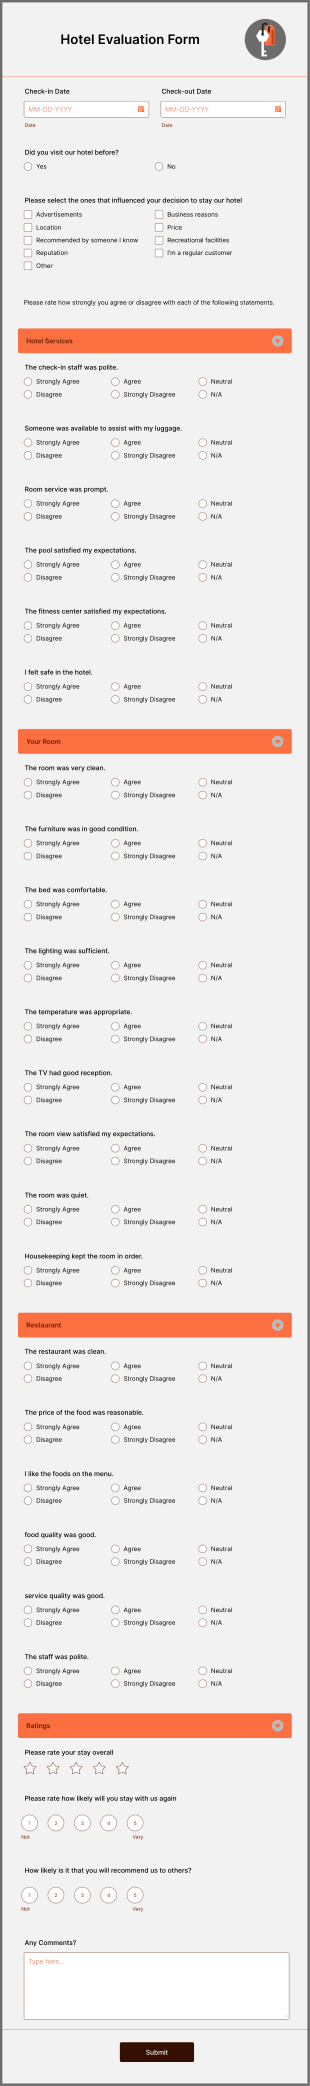 Hotel Evaluation Form Template